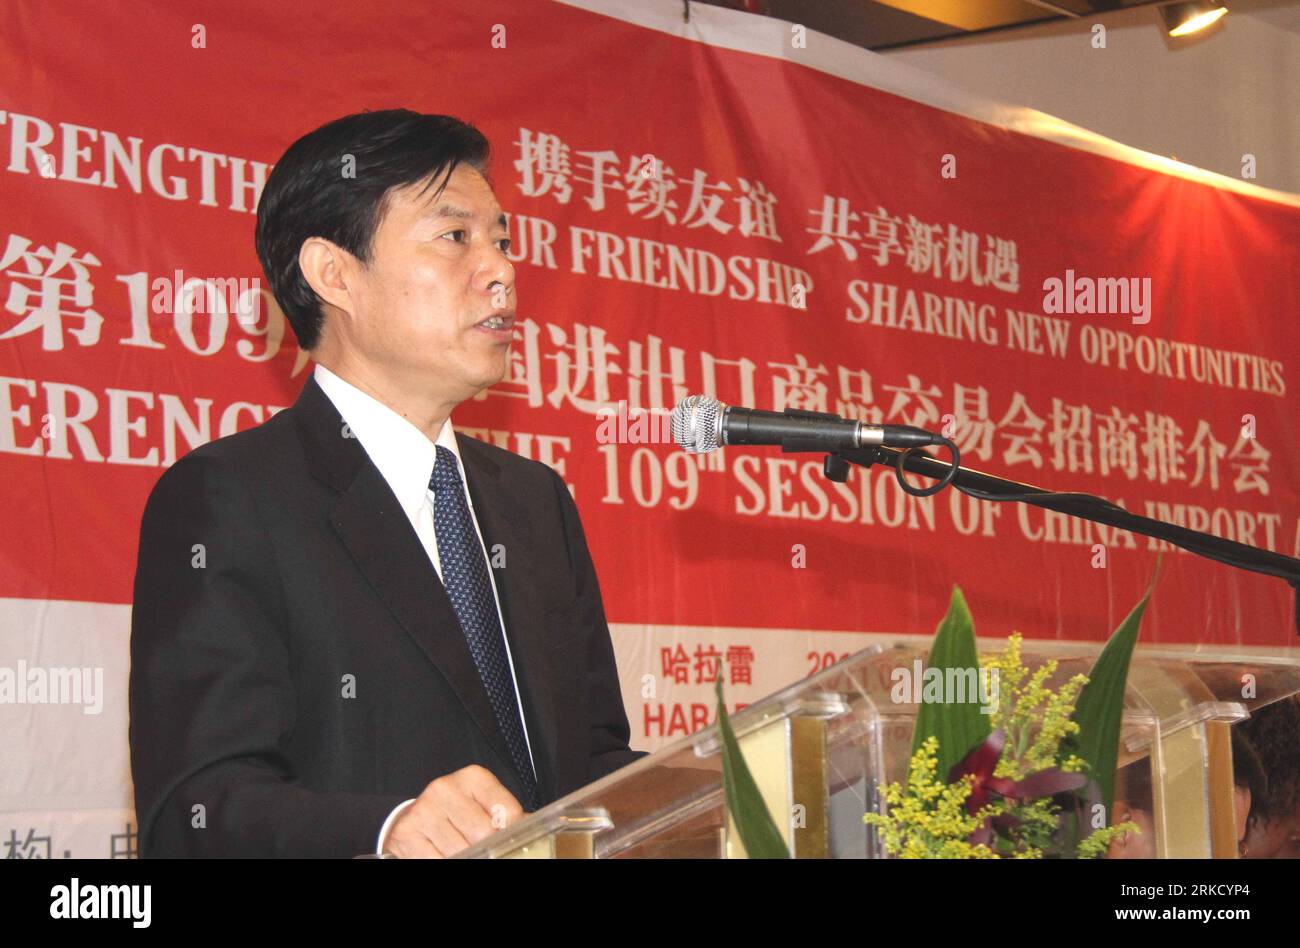 Bildnummer: 54829998  Datum: 18.01.2011  Copyright: imago/Xinhua HARARE, Jan. 18, 2011 (Xinhua) -- China s Deputy Minister of Commerce Zhong Shan speaks at the promotion of the 109th session of China Import and Export Fair in Harare, capital of Zimbabwe, Jan. 18, 2011. Zimbabwe businesses were on Tuesday encouraged to exhibit at the forthcoming China Import and Export Fair to be held in the city of Guangzhou in April. (Xinhua/Li Ping) (wjd) ZIMBABWE-CHINA IMPORT AND EXPORT FAIR-PROMOTION PUBLICATIONxNOTxINxCHN Politik People kbdig xub 2011 quer    Bildnummer 54829998 Date 18 01 2011 Copyright Stock Photo